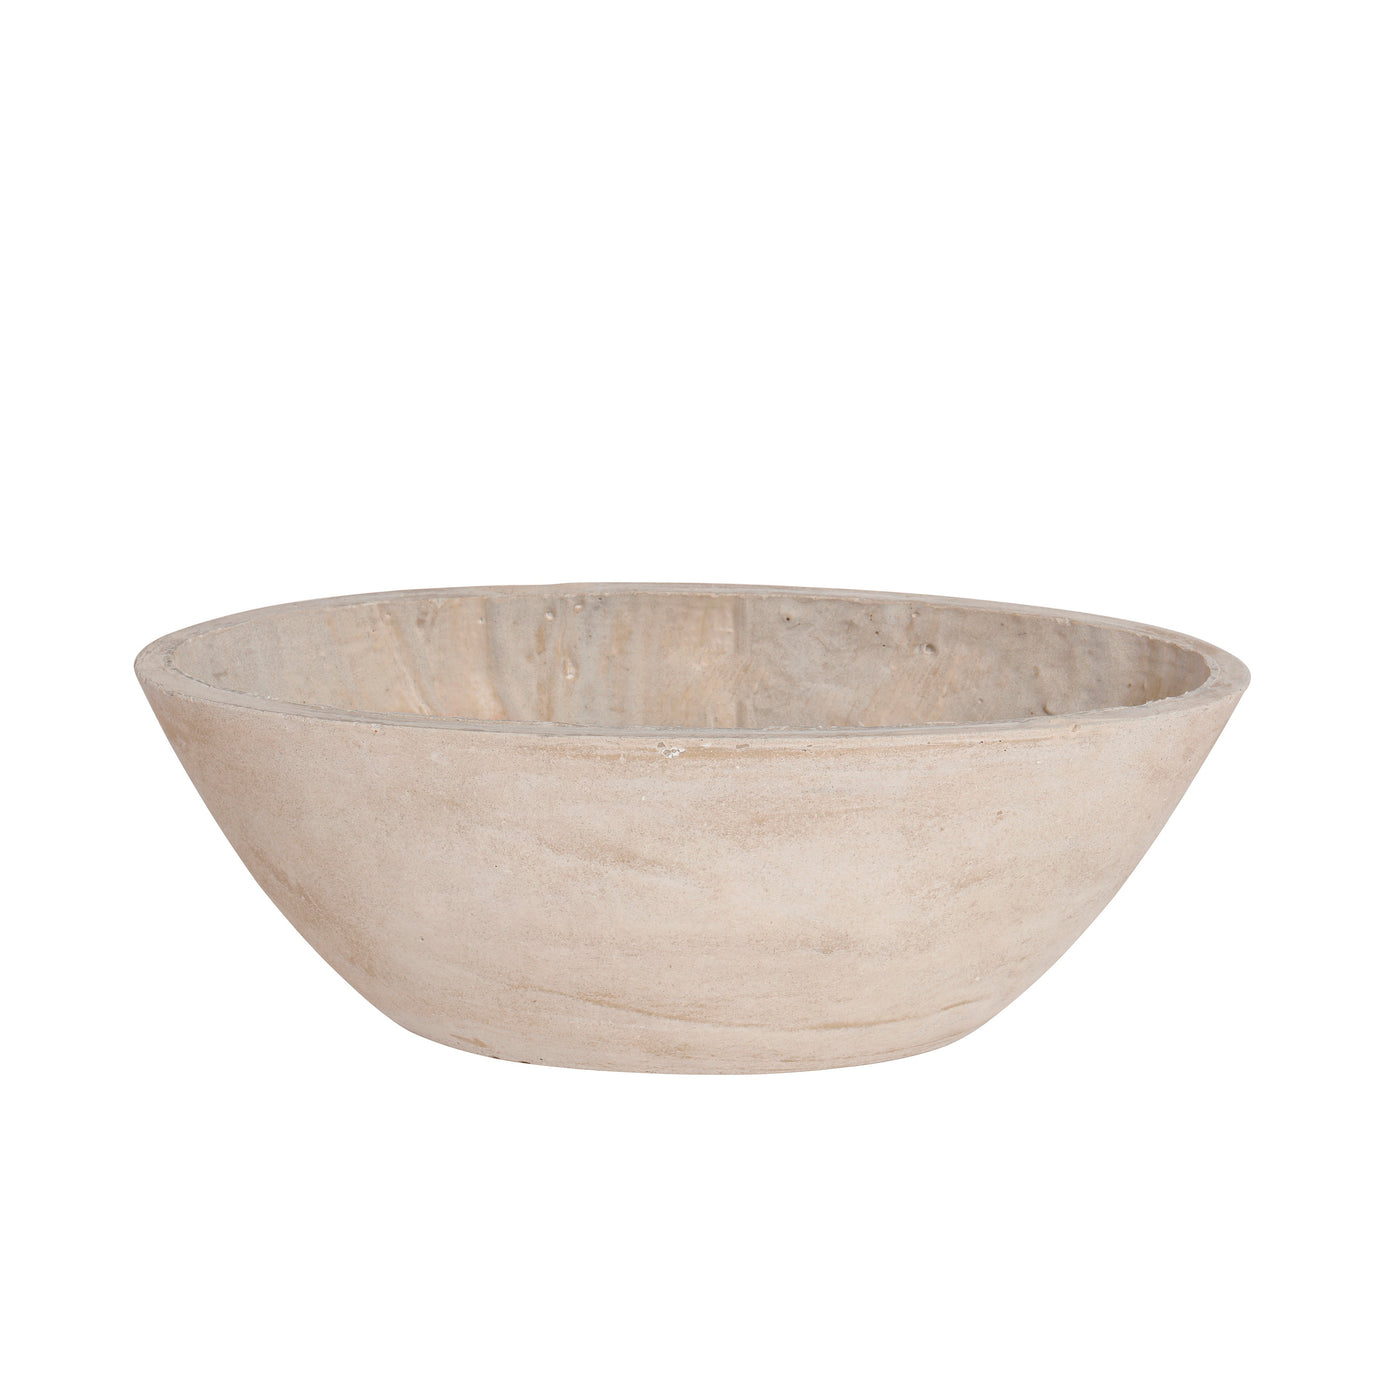 Contemporary oval stonecast planter in natural taupe